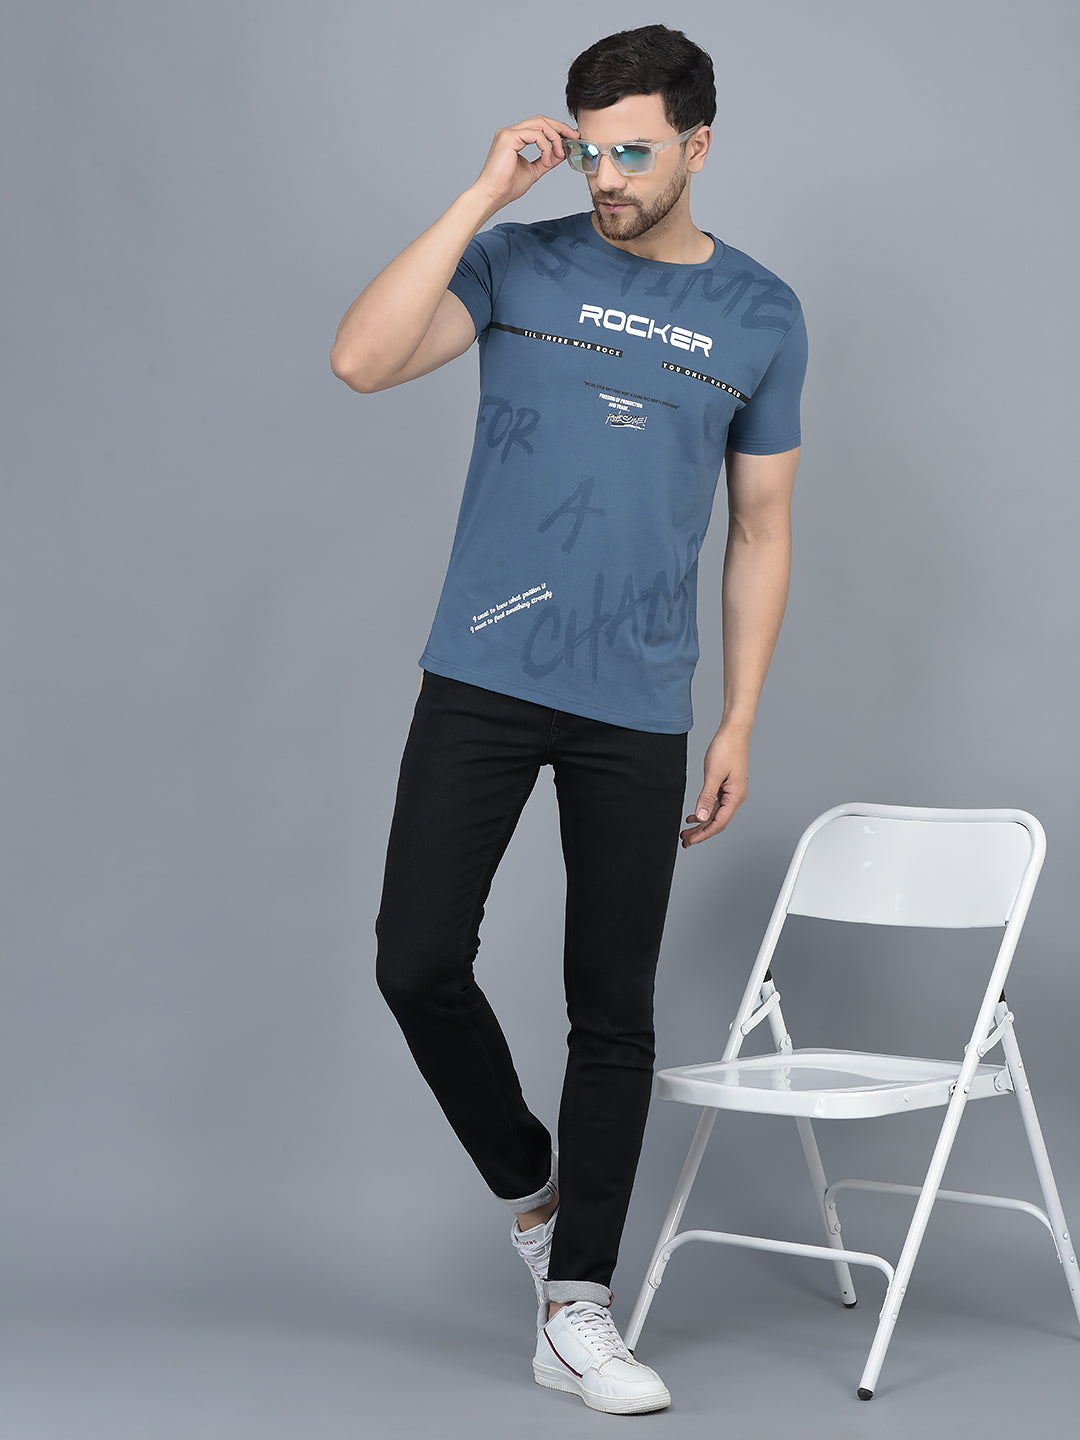 4 Tshirt Combination For Men For A Stylish Look| Bewakoof